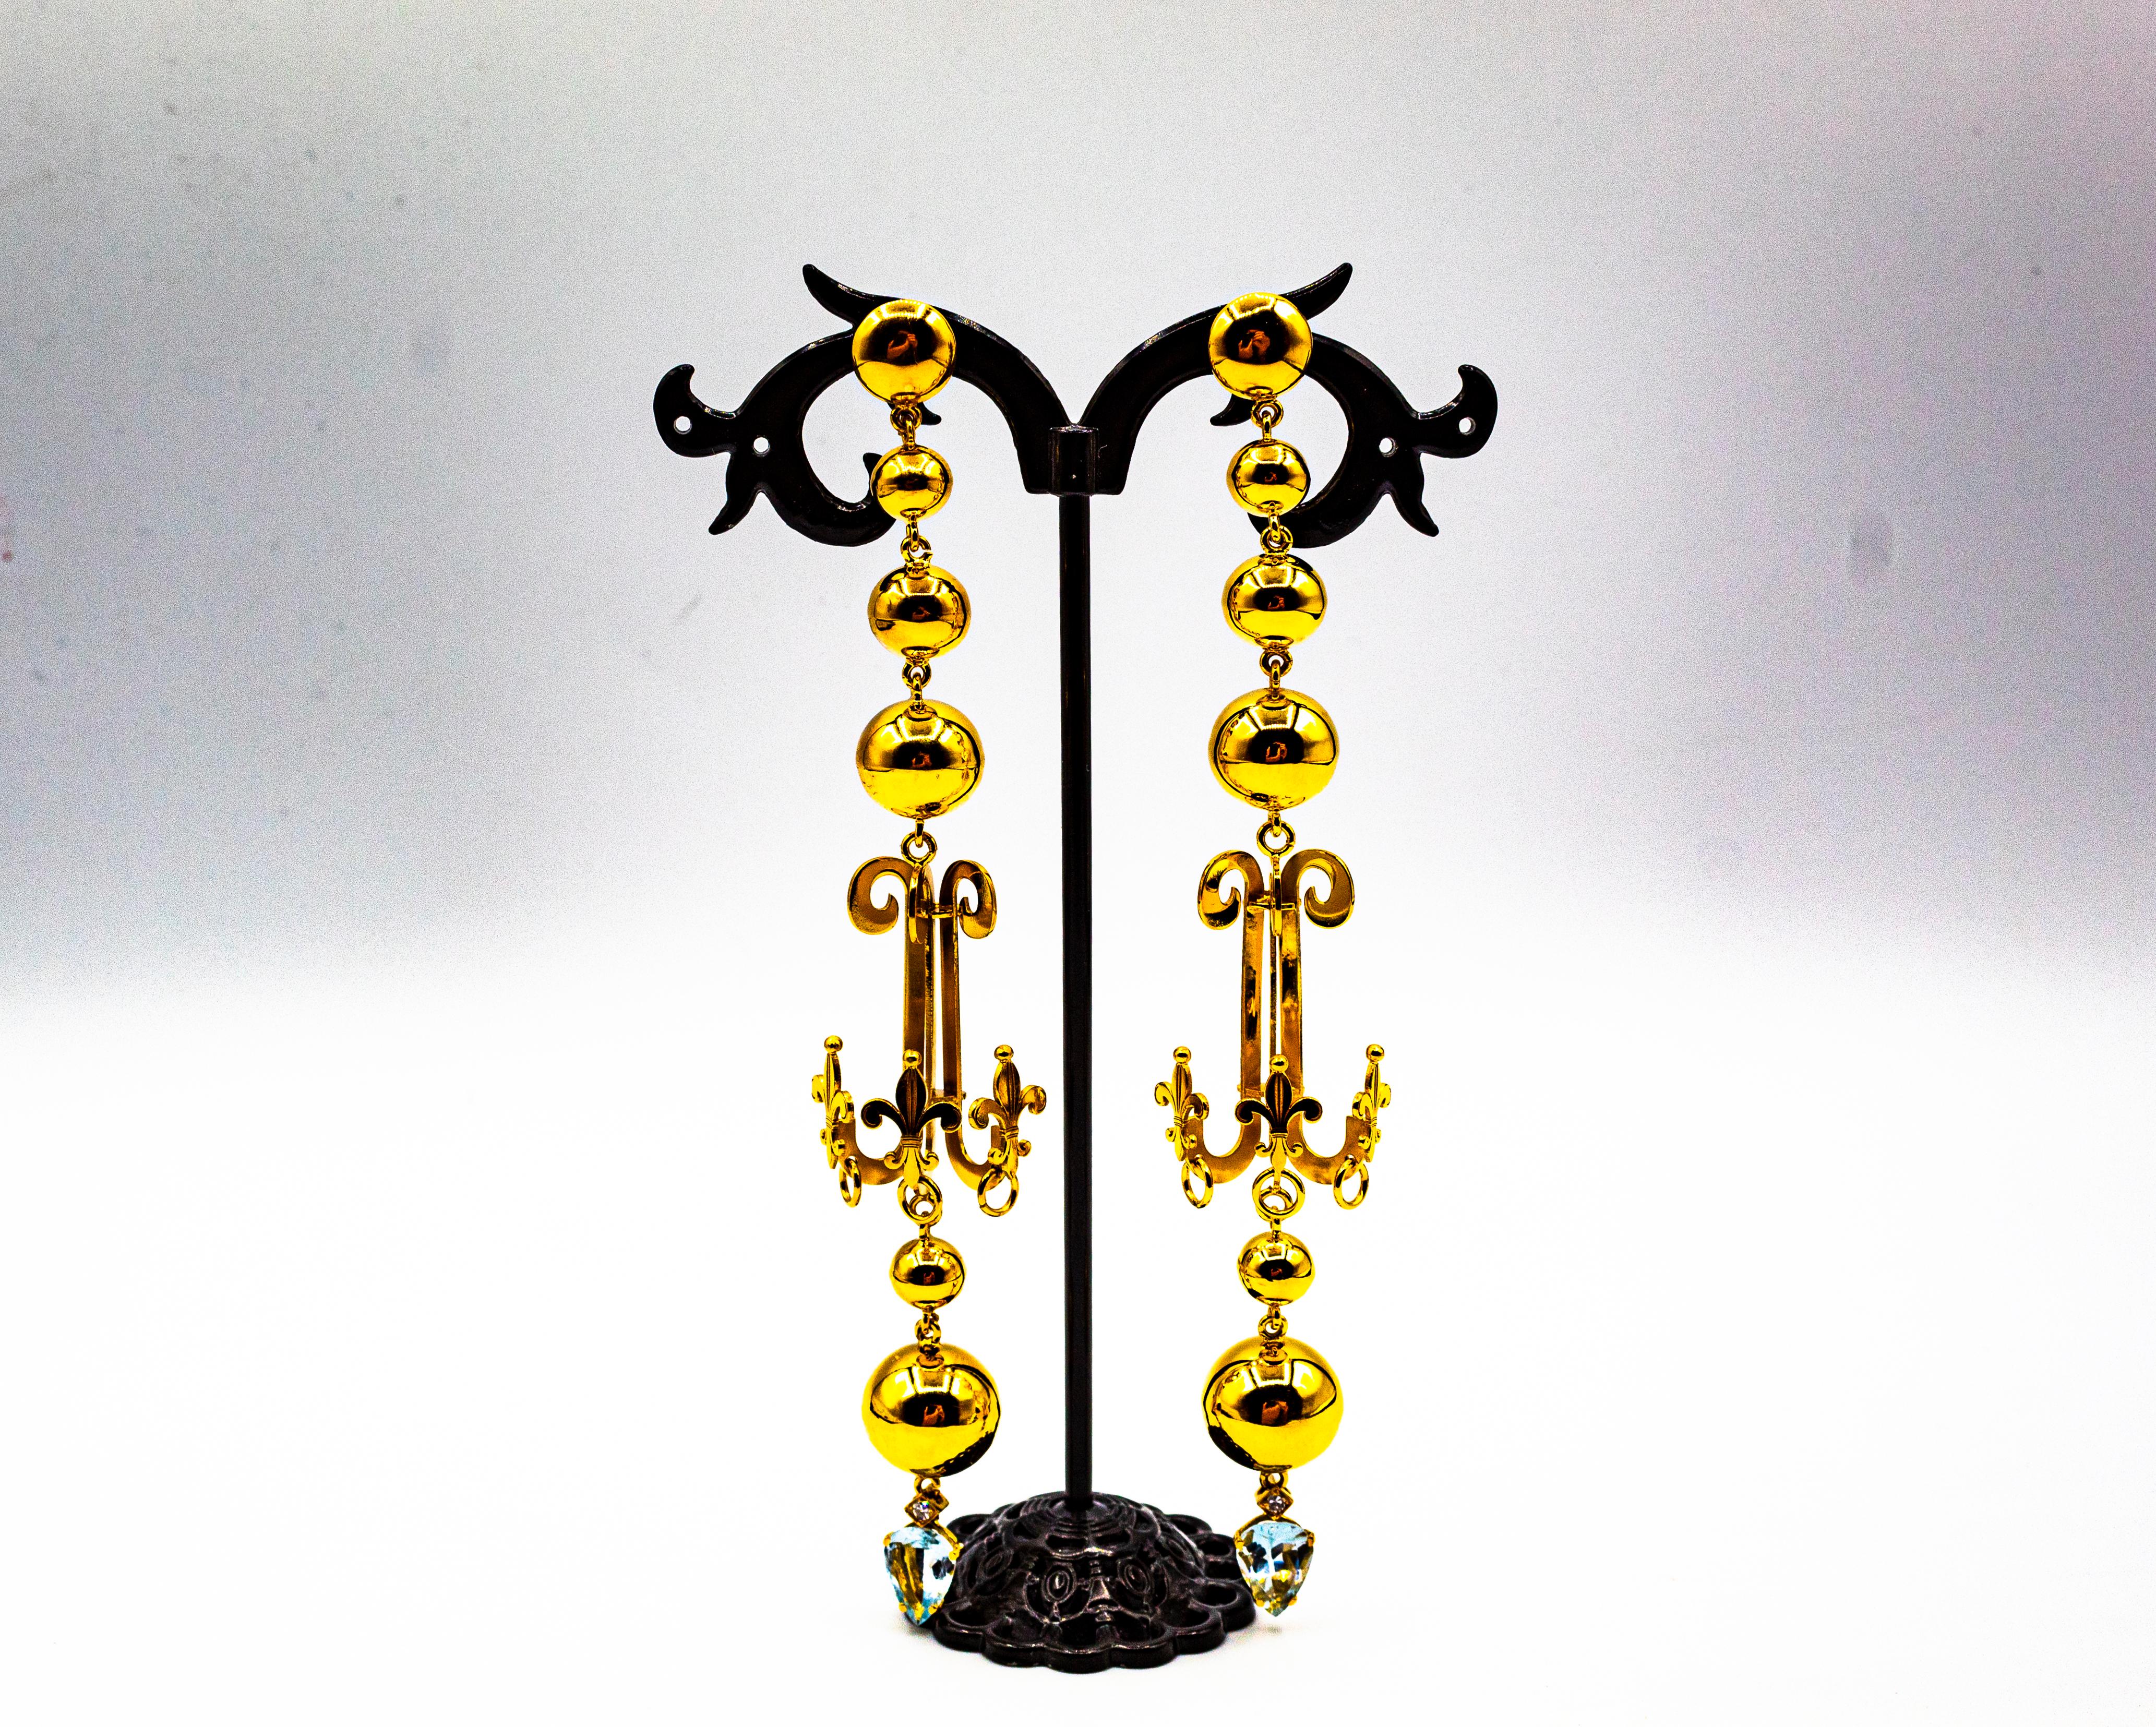 These Earrings are made of 9K Yellow Gold.
These Earrings have 0.10 Carats of White Brilliant Cut Diamonds.
These Earrings have 2.80 Carats of Aquamarines.
These Earrings are inspired by Art Deco.

All our Earrings have pins for pierced ears but we